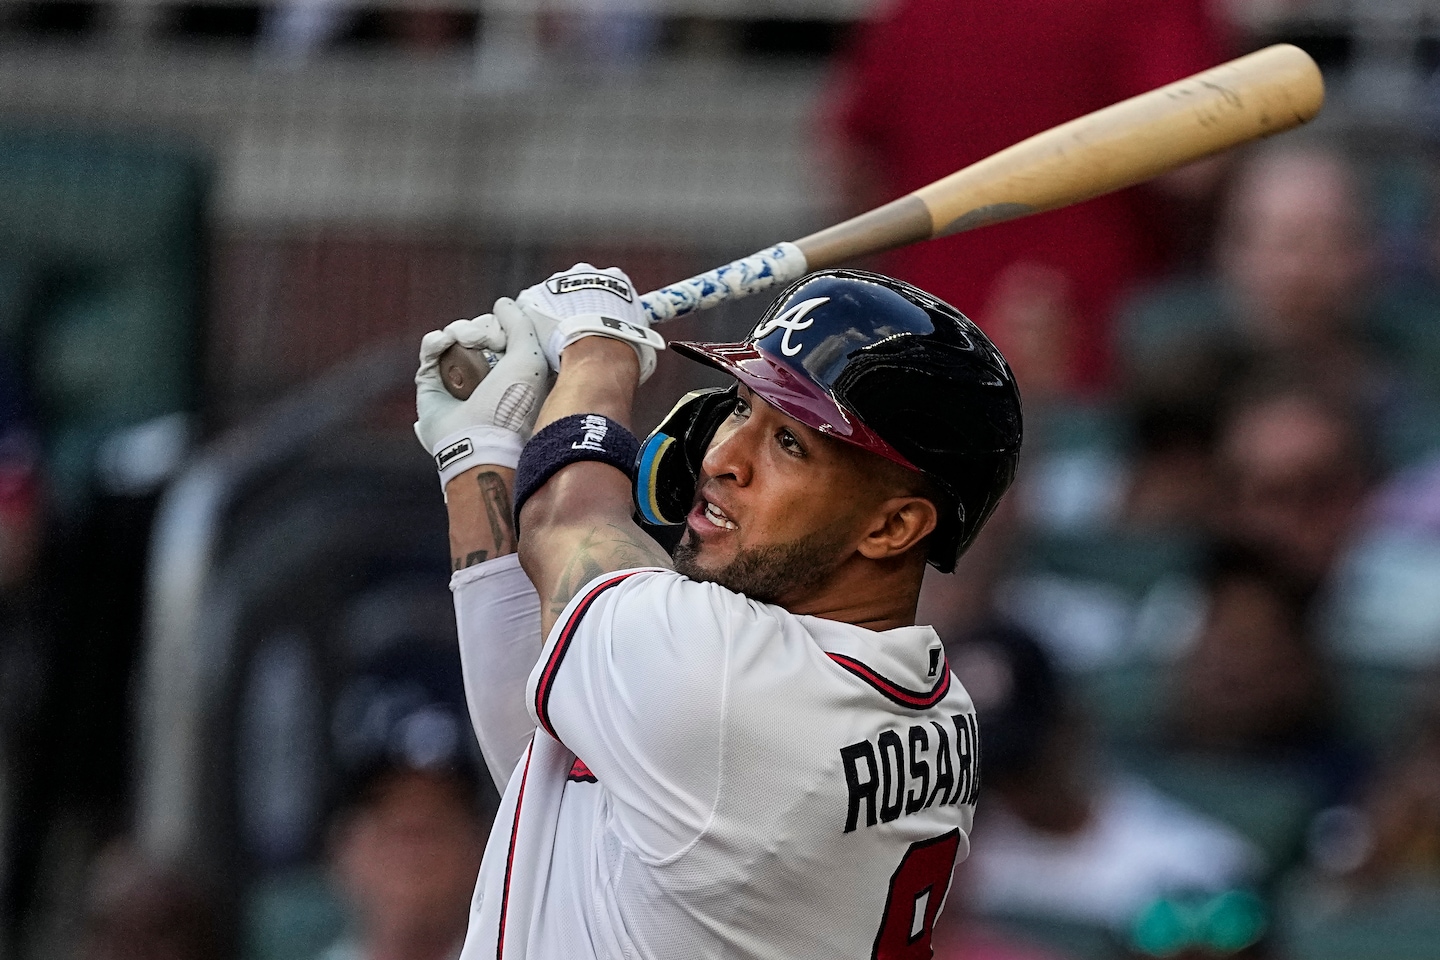 Outfielder Eddie Rosario set to join Nationals on a minor league deal